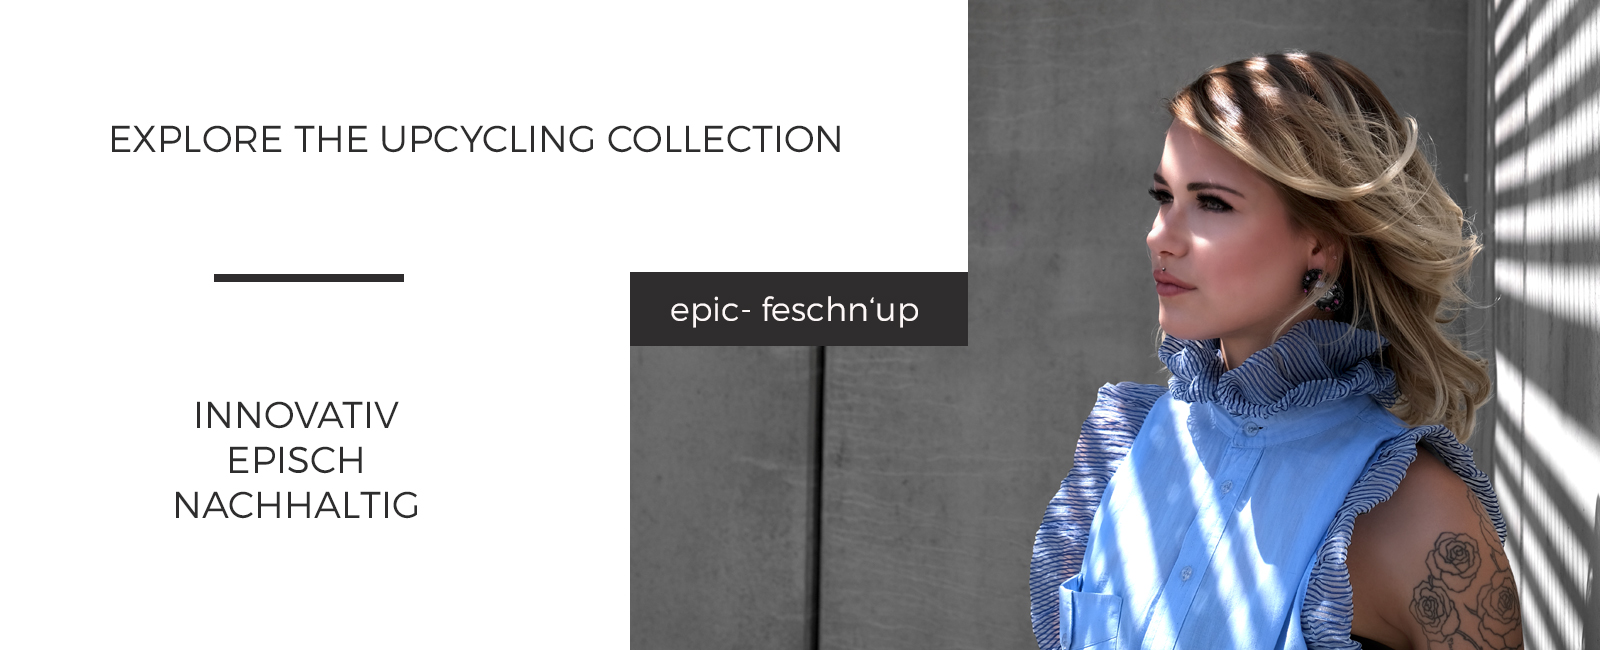 feschn-up epic-couture